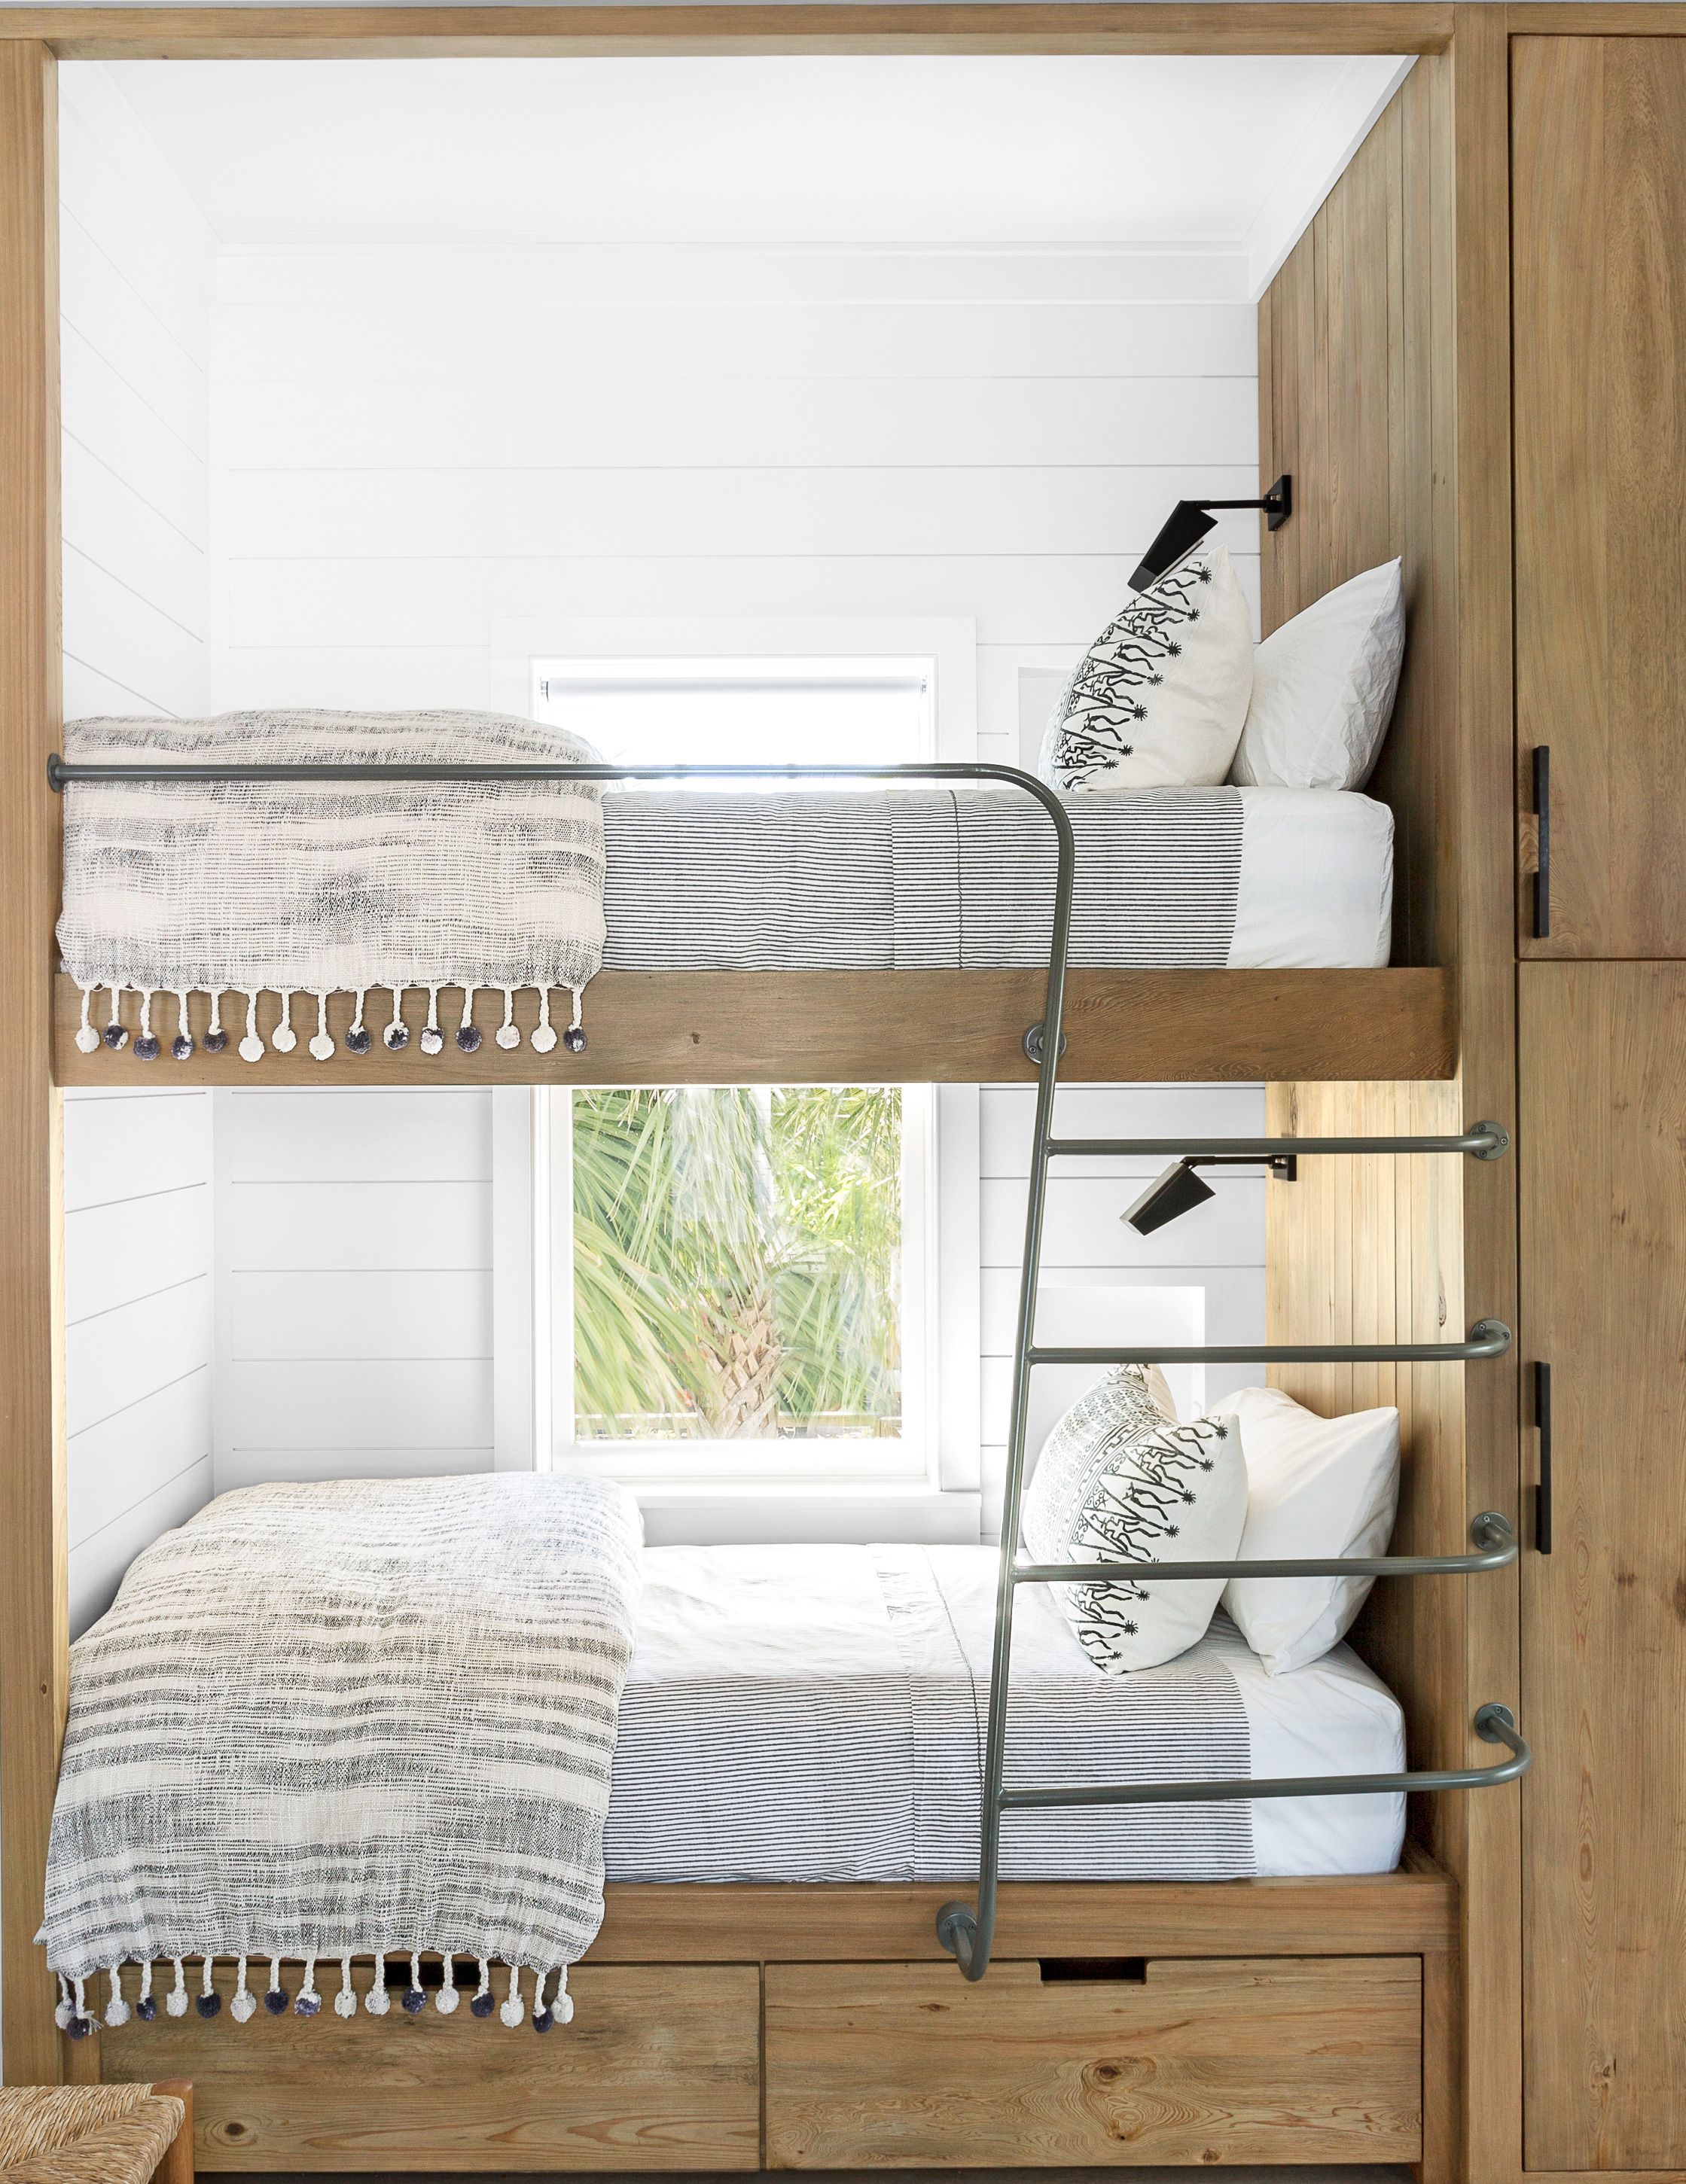 16 Cool Bunk Beds Bed Designs, Bunk Beds With Beds